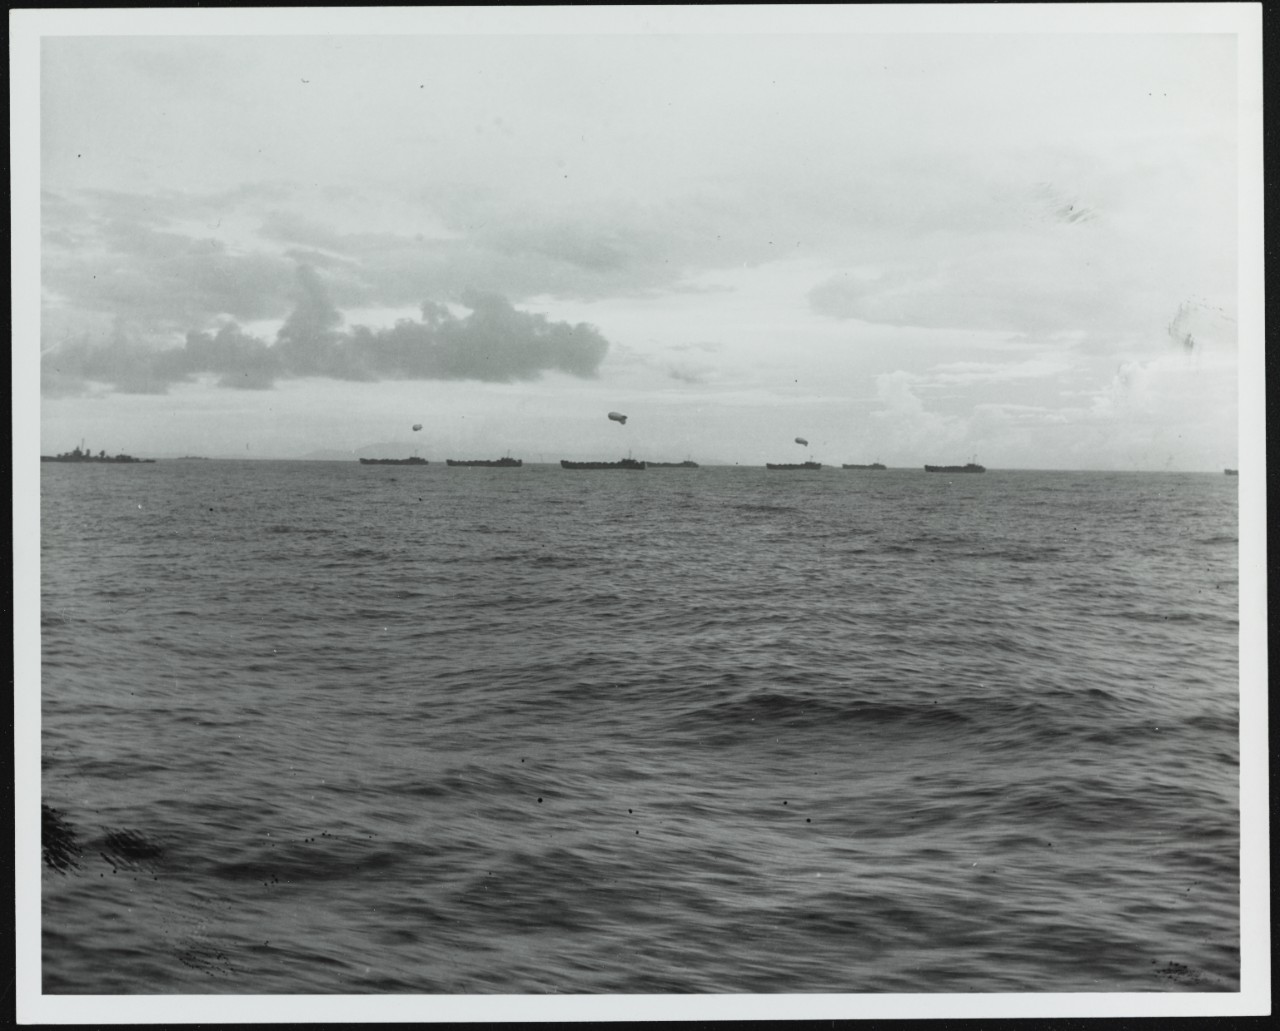 LST convoy with USS EATON (DD-510)